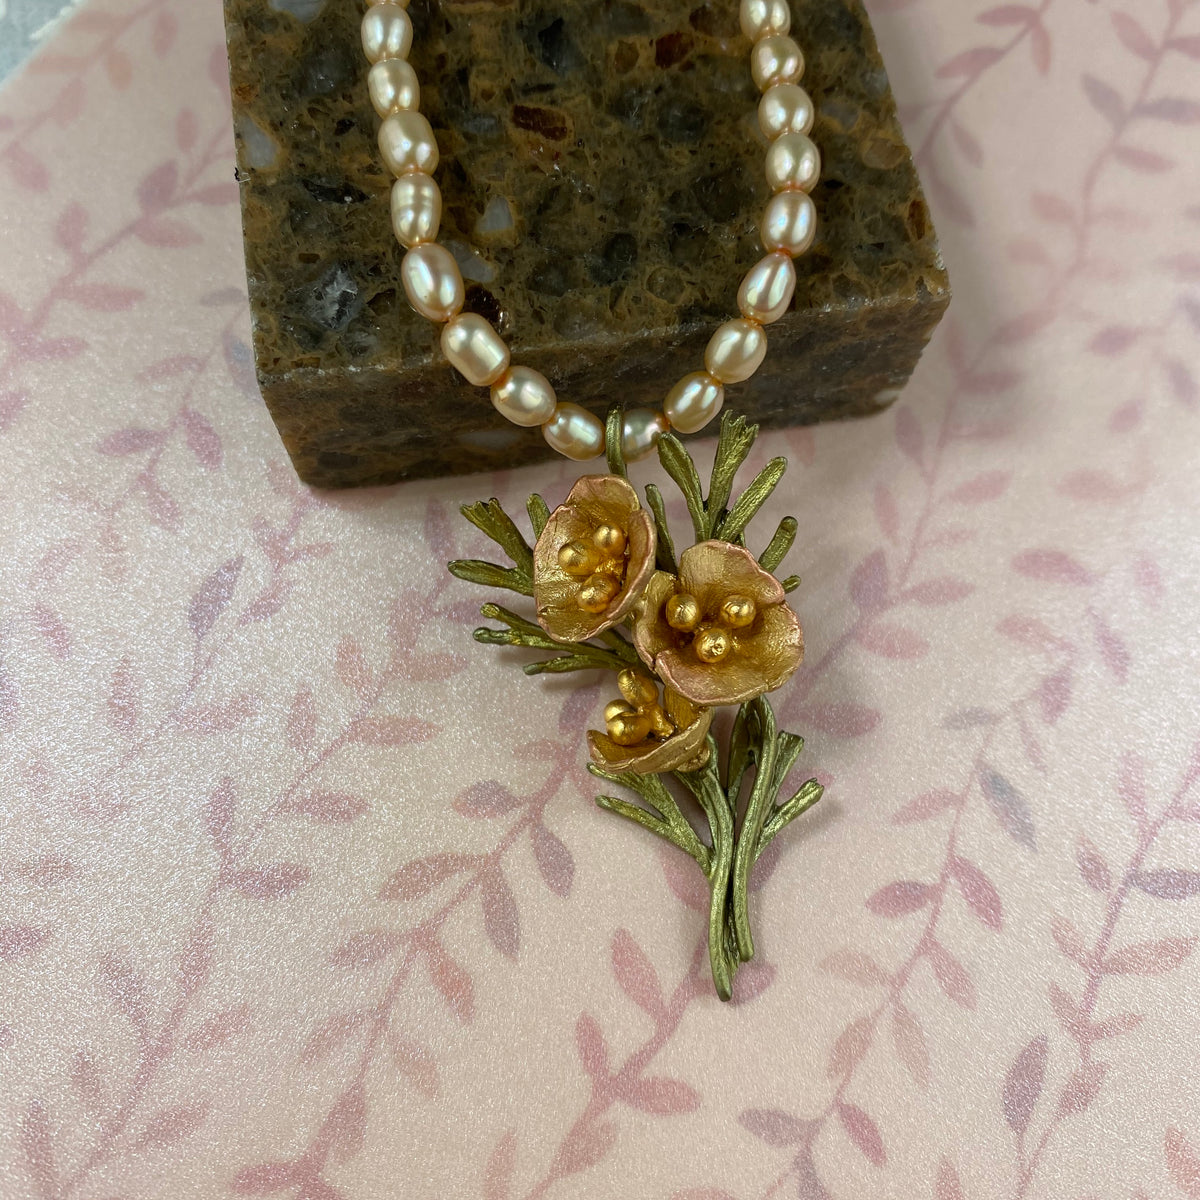 California Poppy Pendant on Pearls - Heart of the Home PA